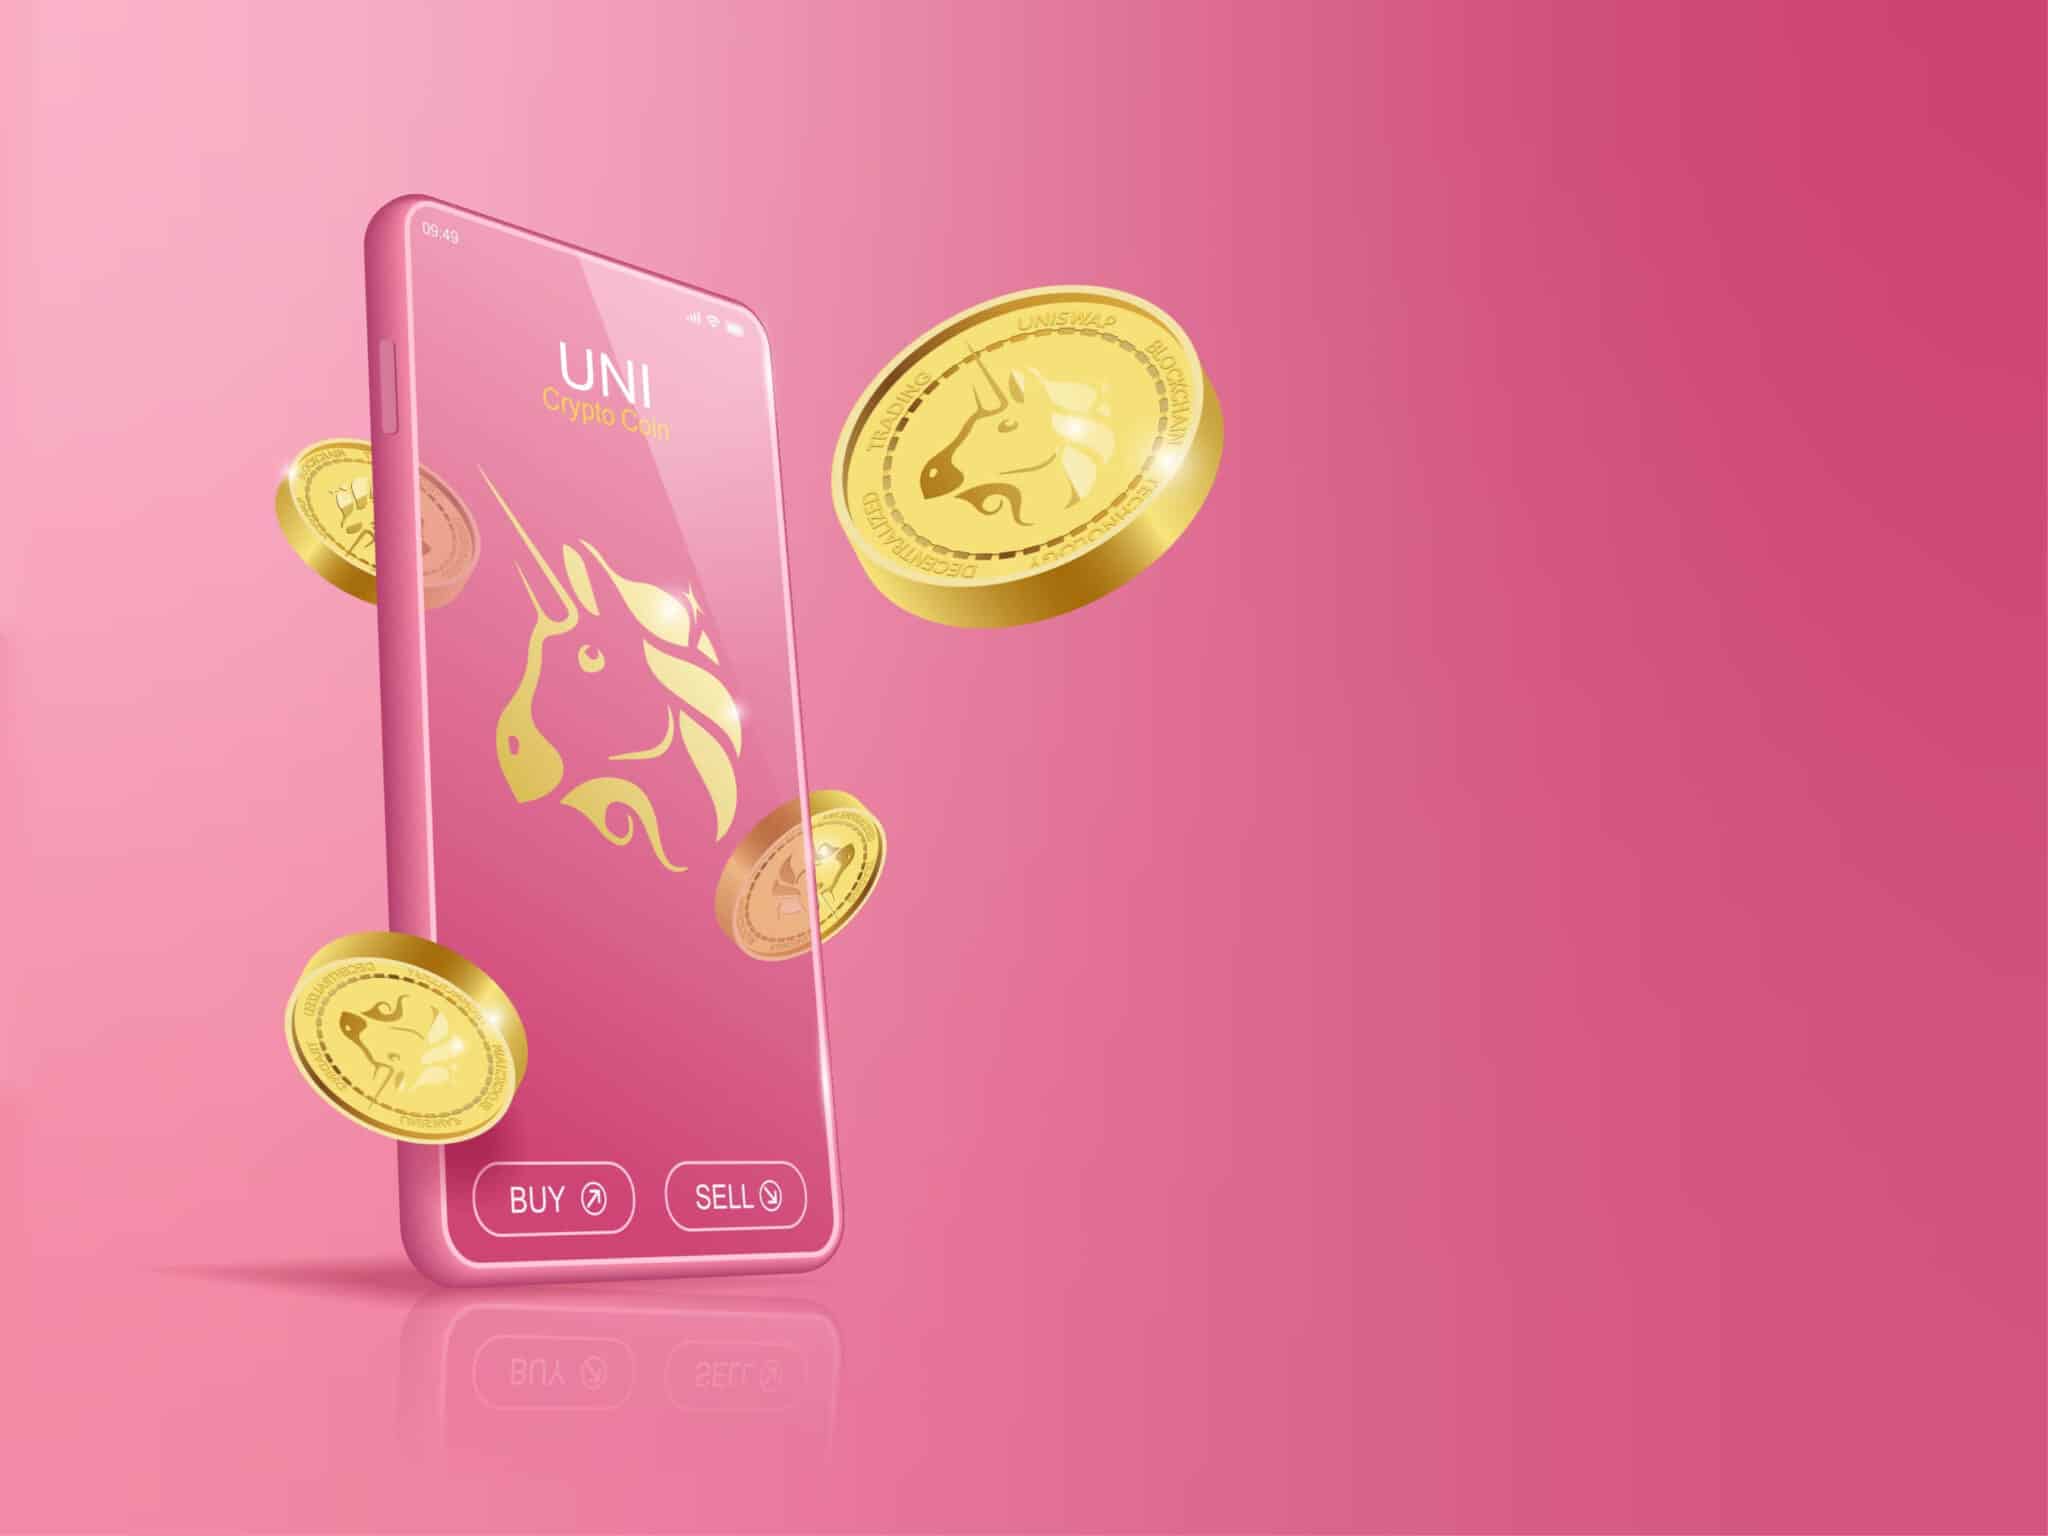 Uniswap (UNI) coin logo on a phone and pink background.